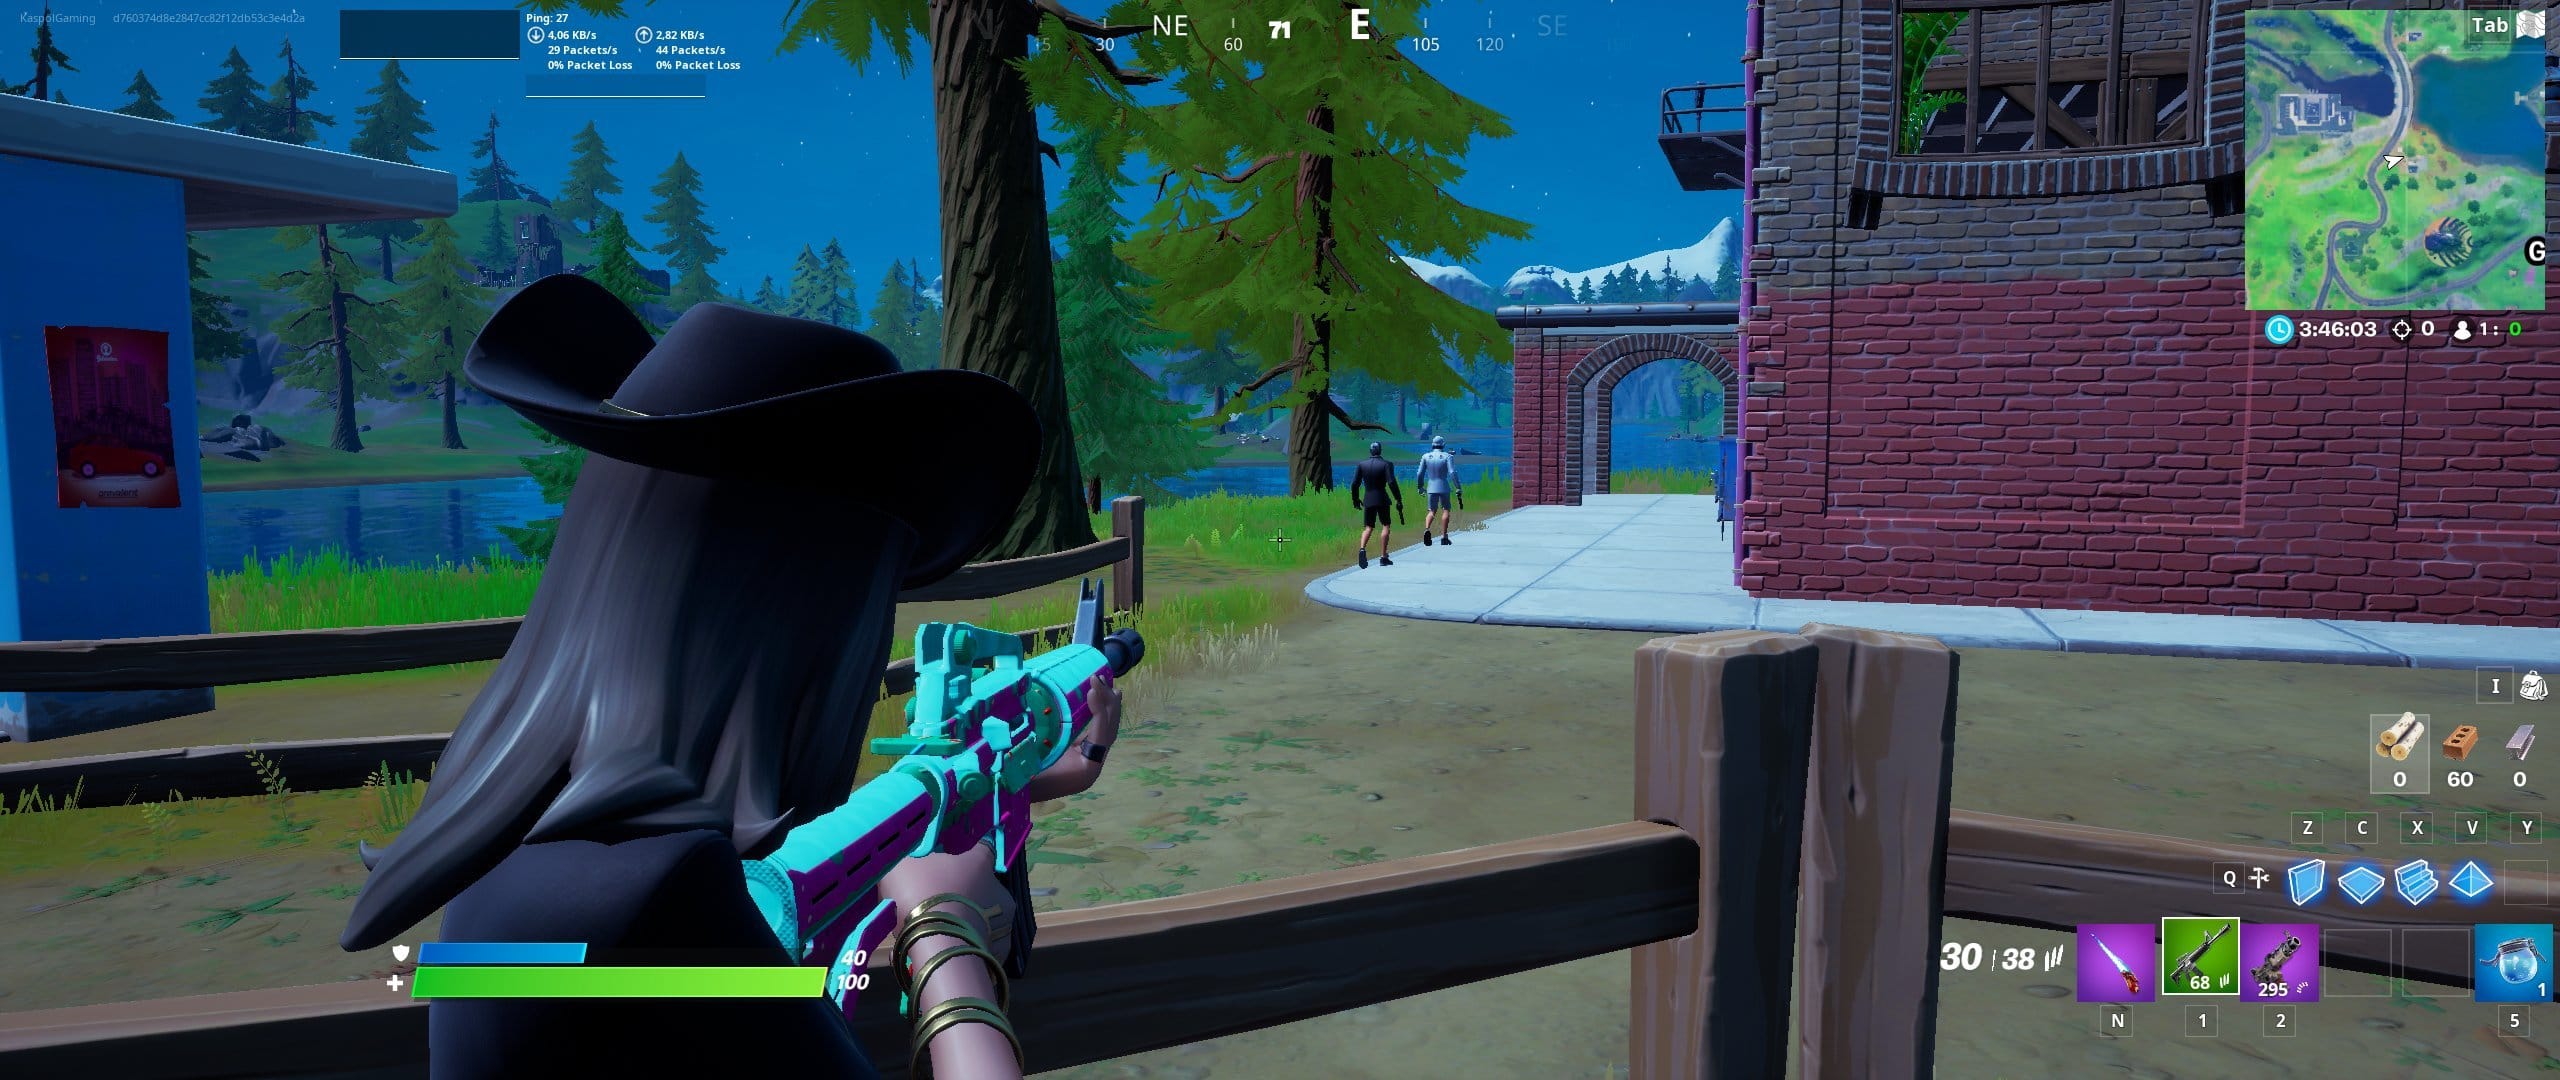 Fortnite 14.30 unofficial patch notes / Fortnitemares 2020